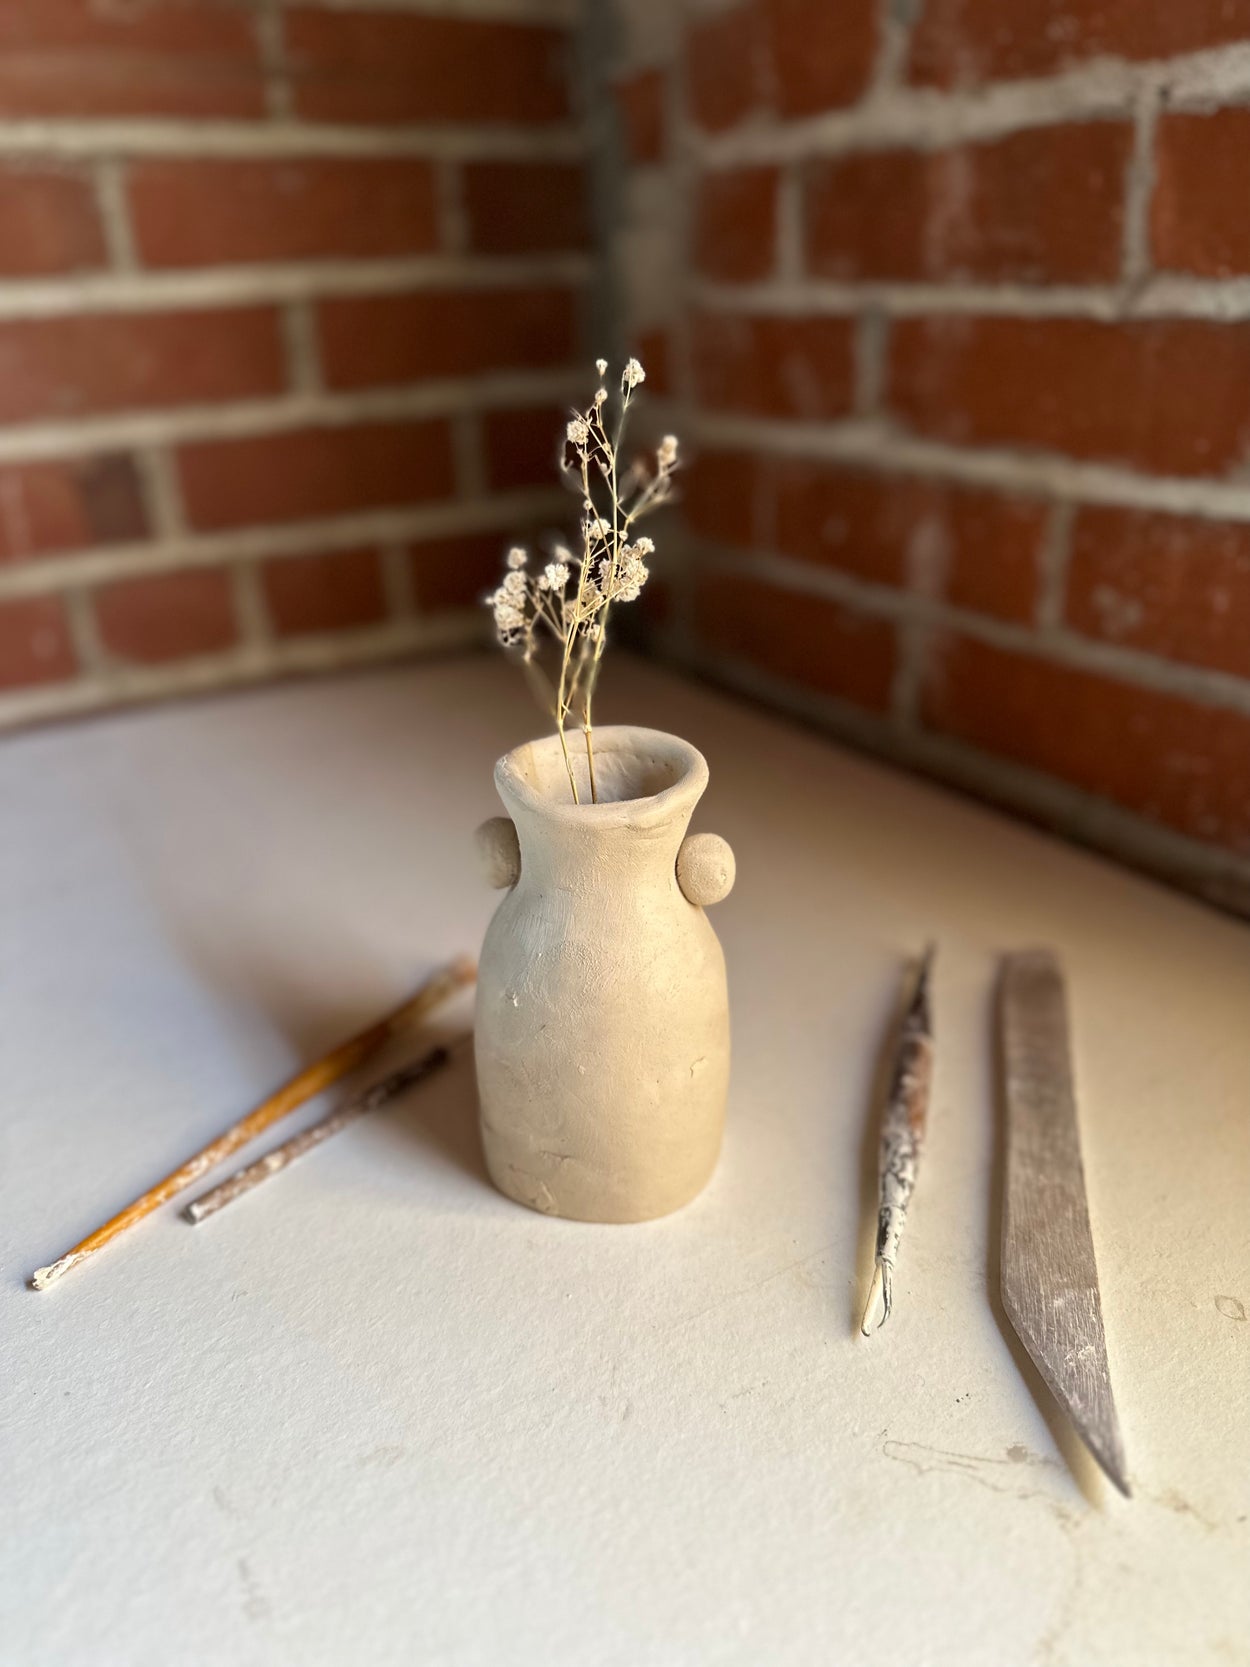 Bud Vase Class: Group Hand Building